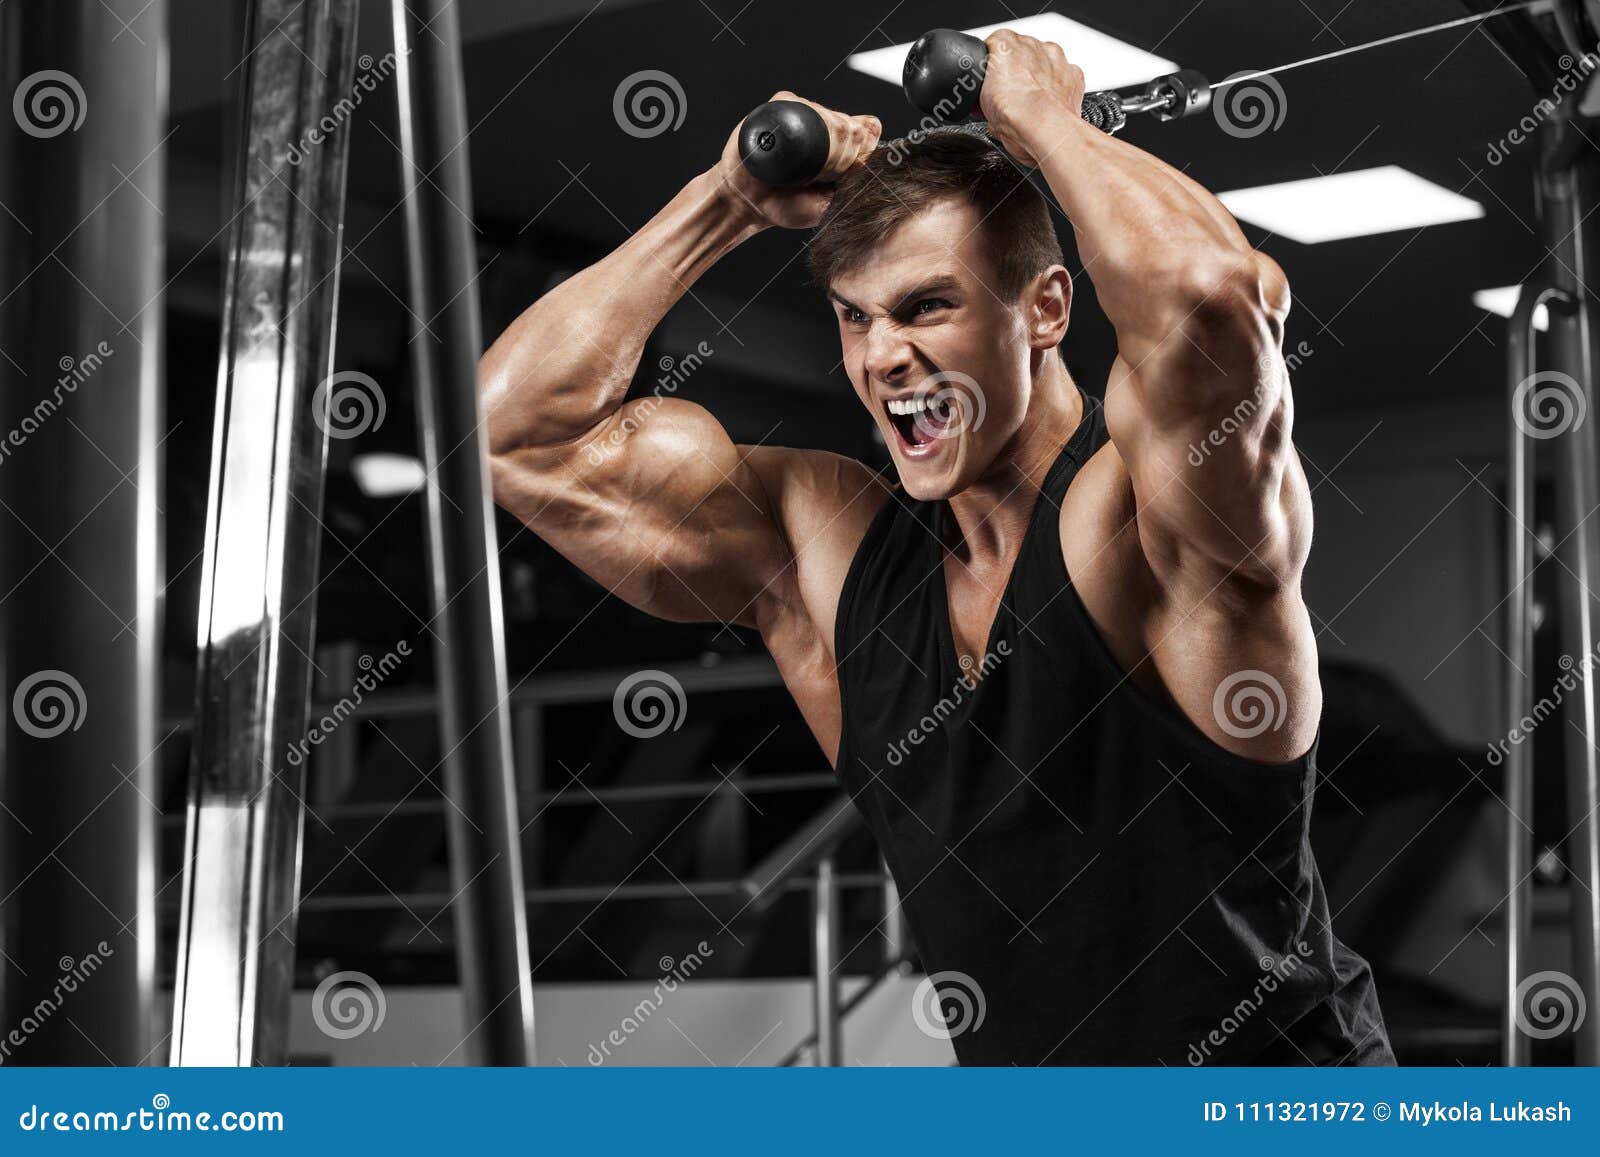 Muscular Man Working Out in Gym, Bodybuilder Strong Male Stock Photo